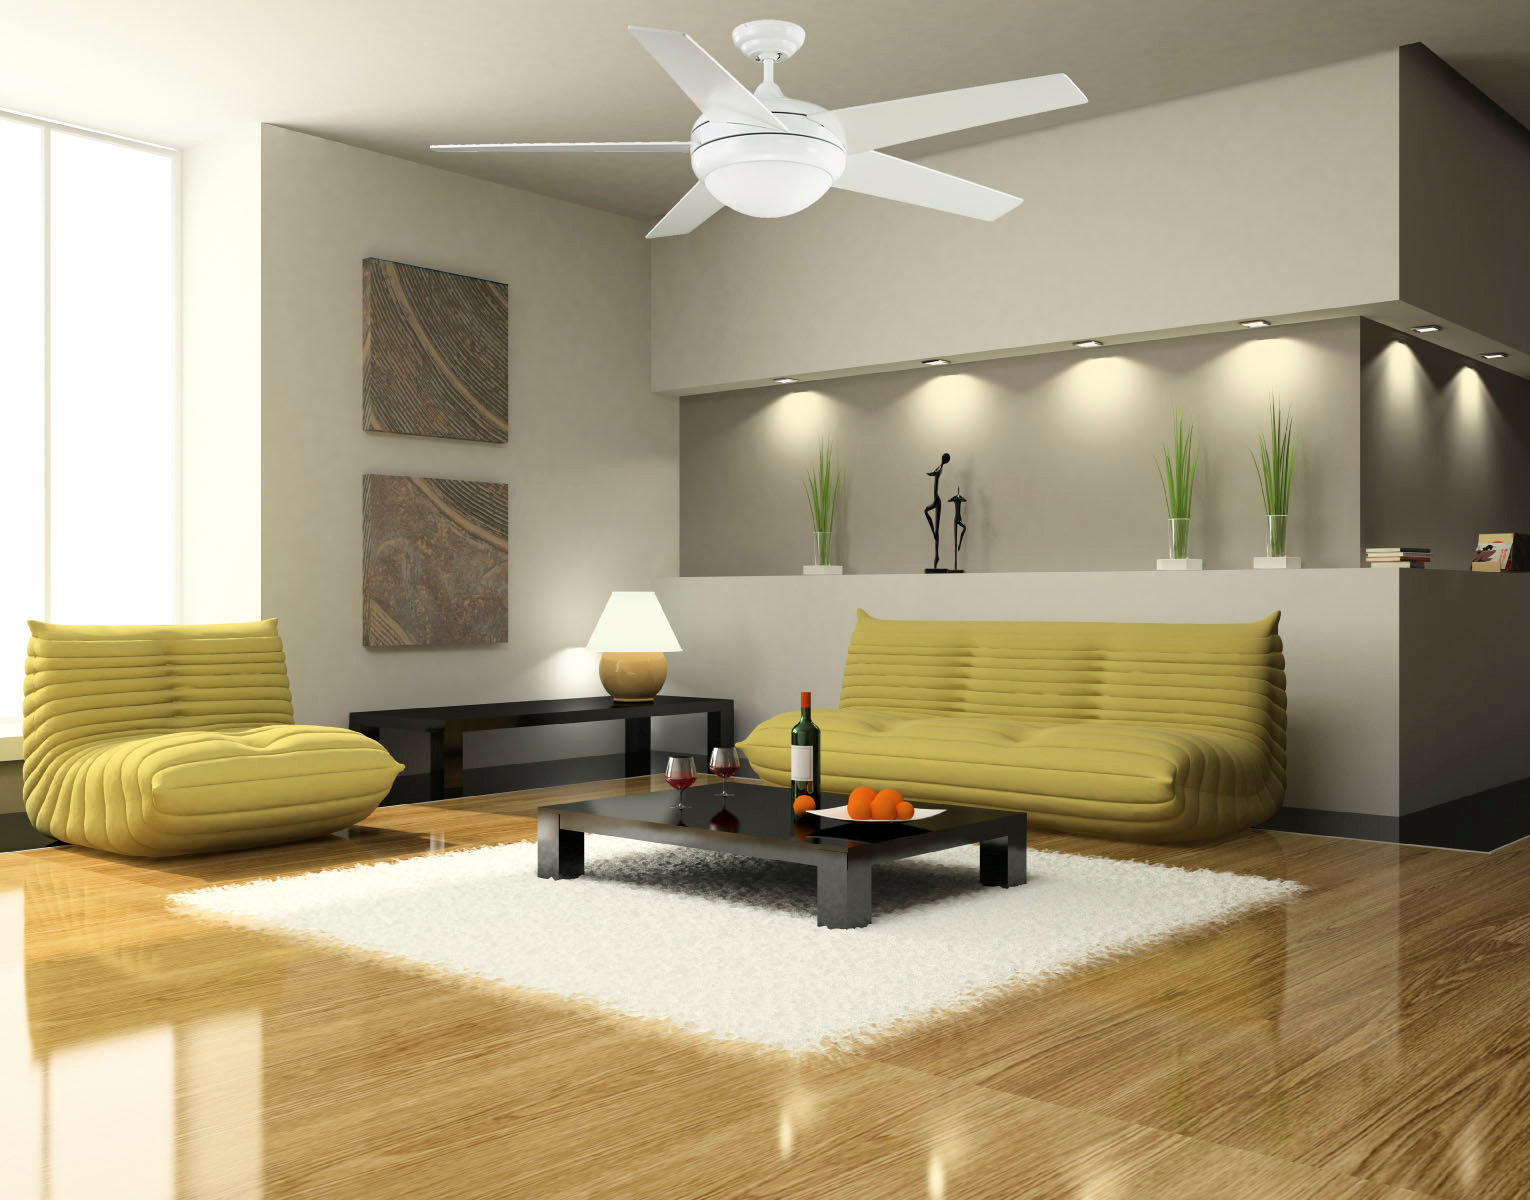 Ceiling fan installation in Central New Jersey